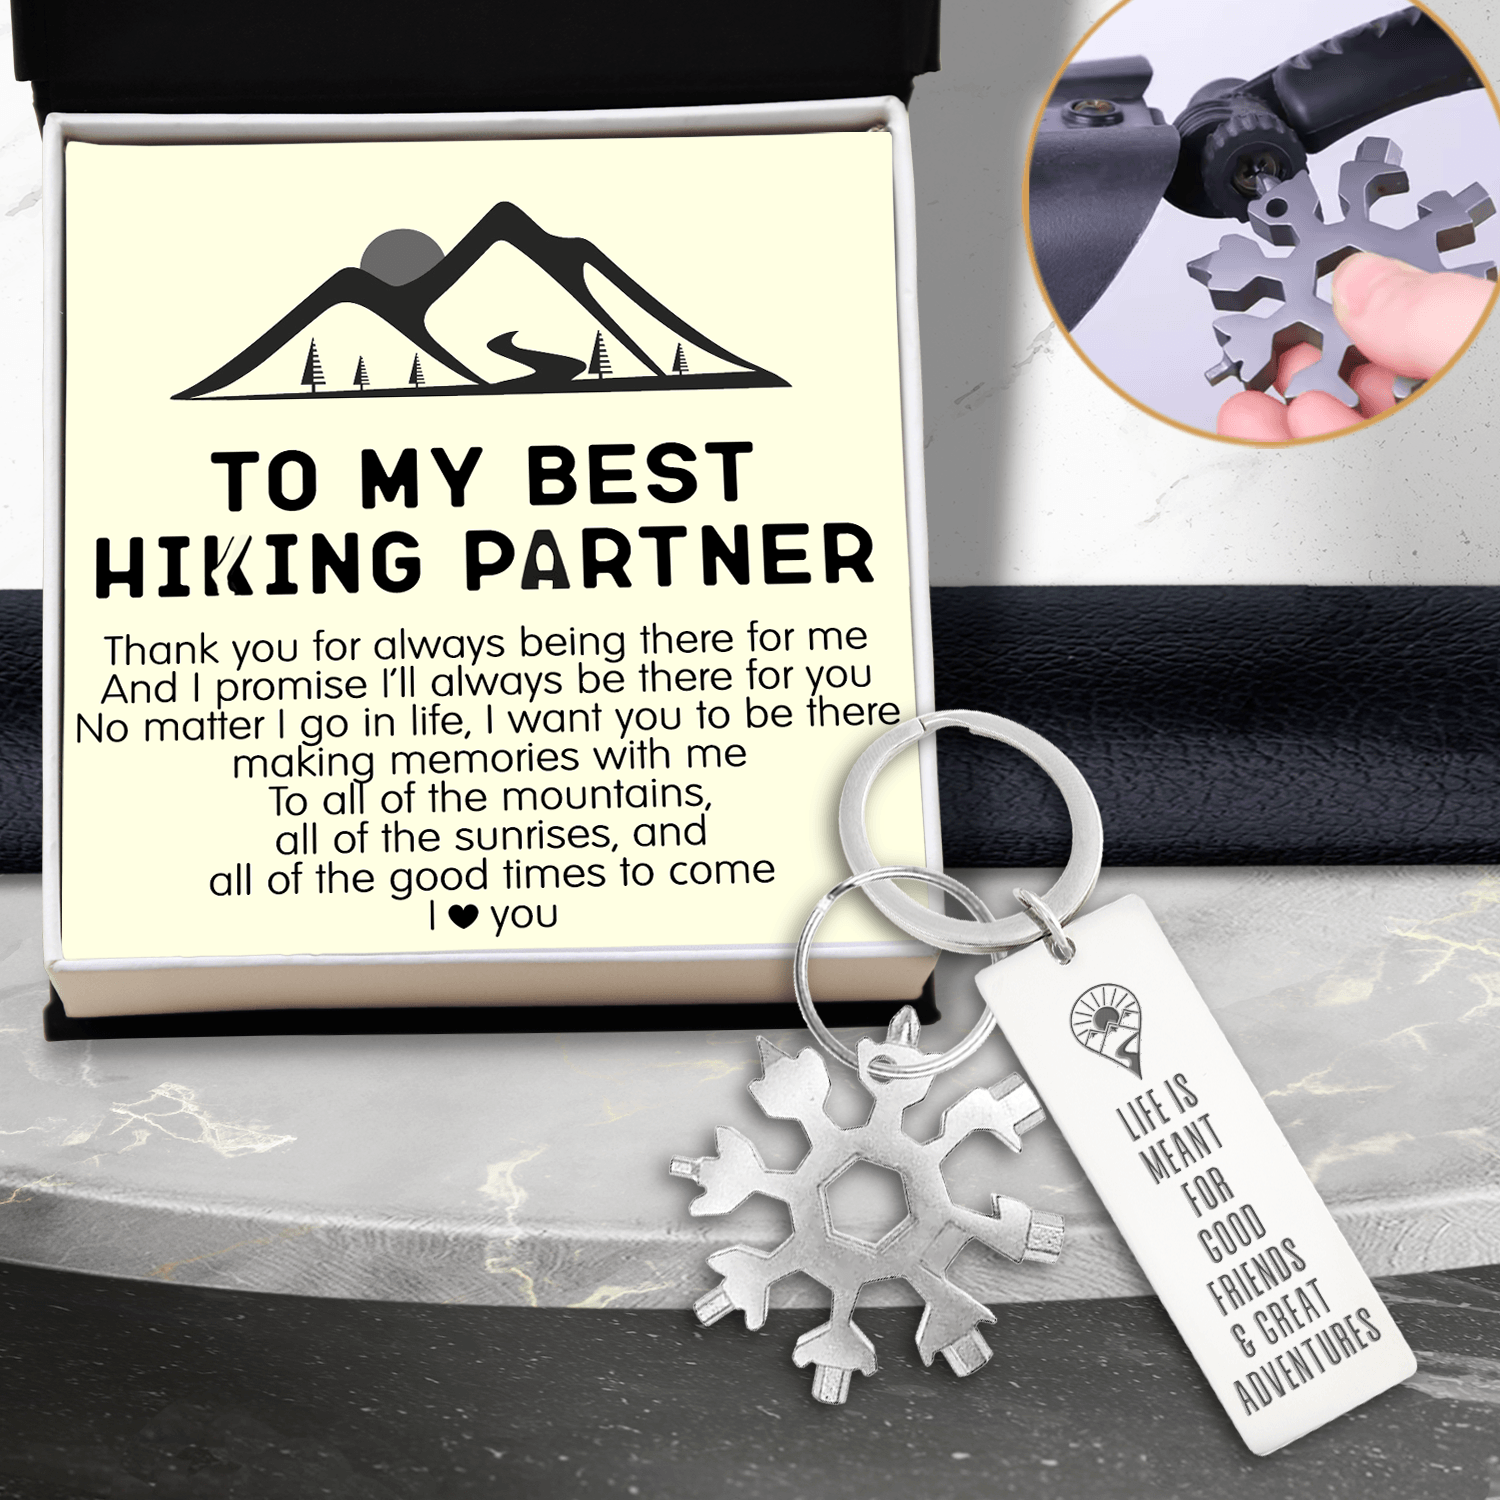 Multitool Keychain - Hiking - To My Best Hiking Partner - Life Is Meant for Good Friends & Great Adventures - Augktb33002 - Gifts Holder